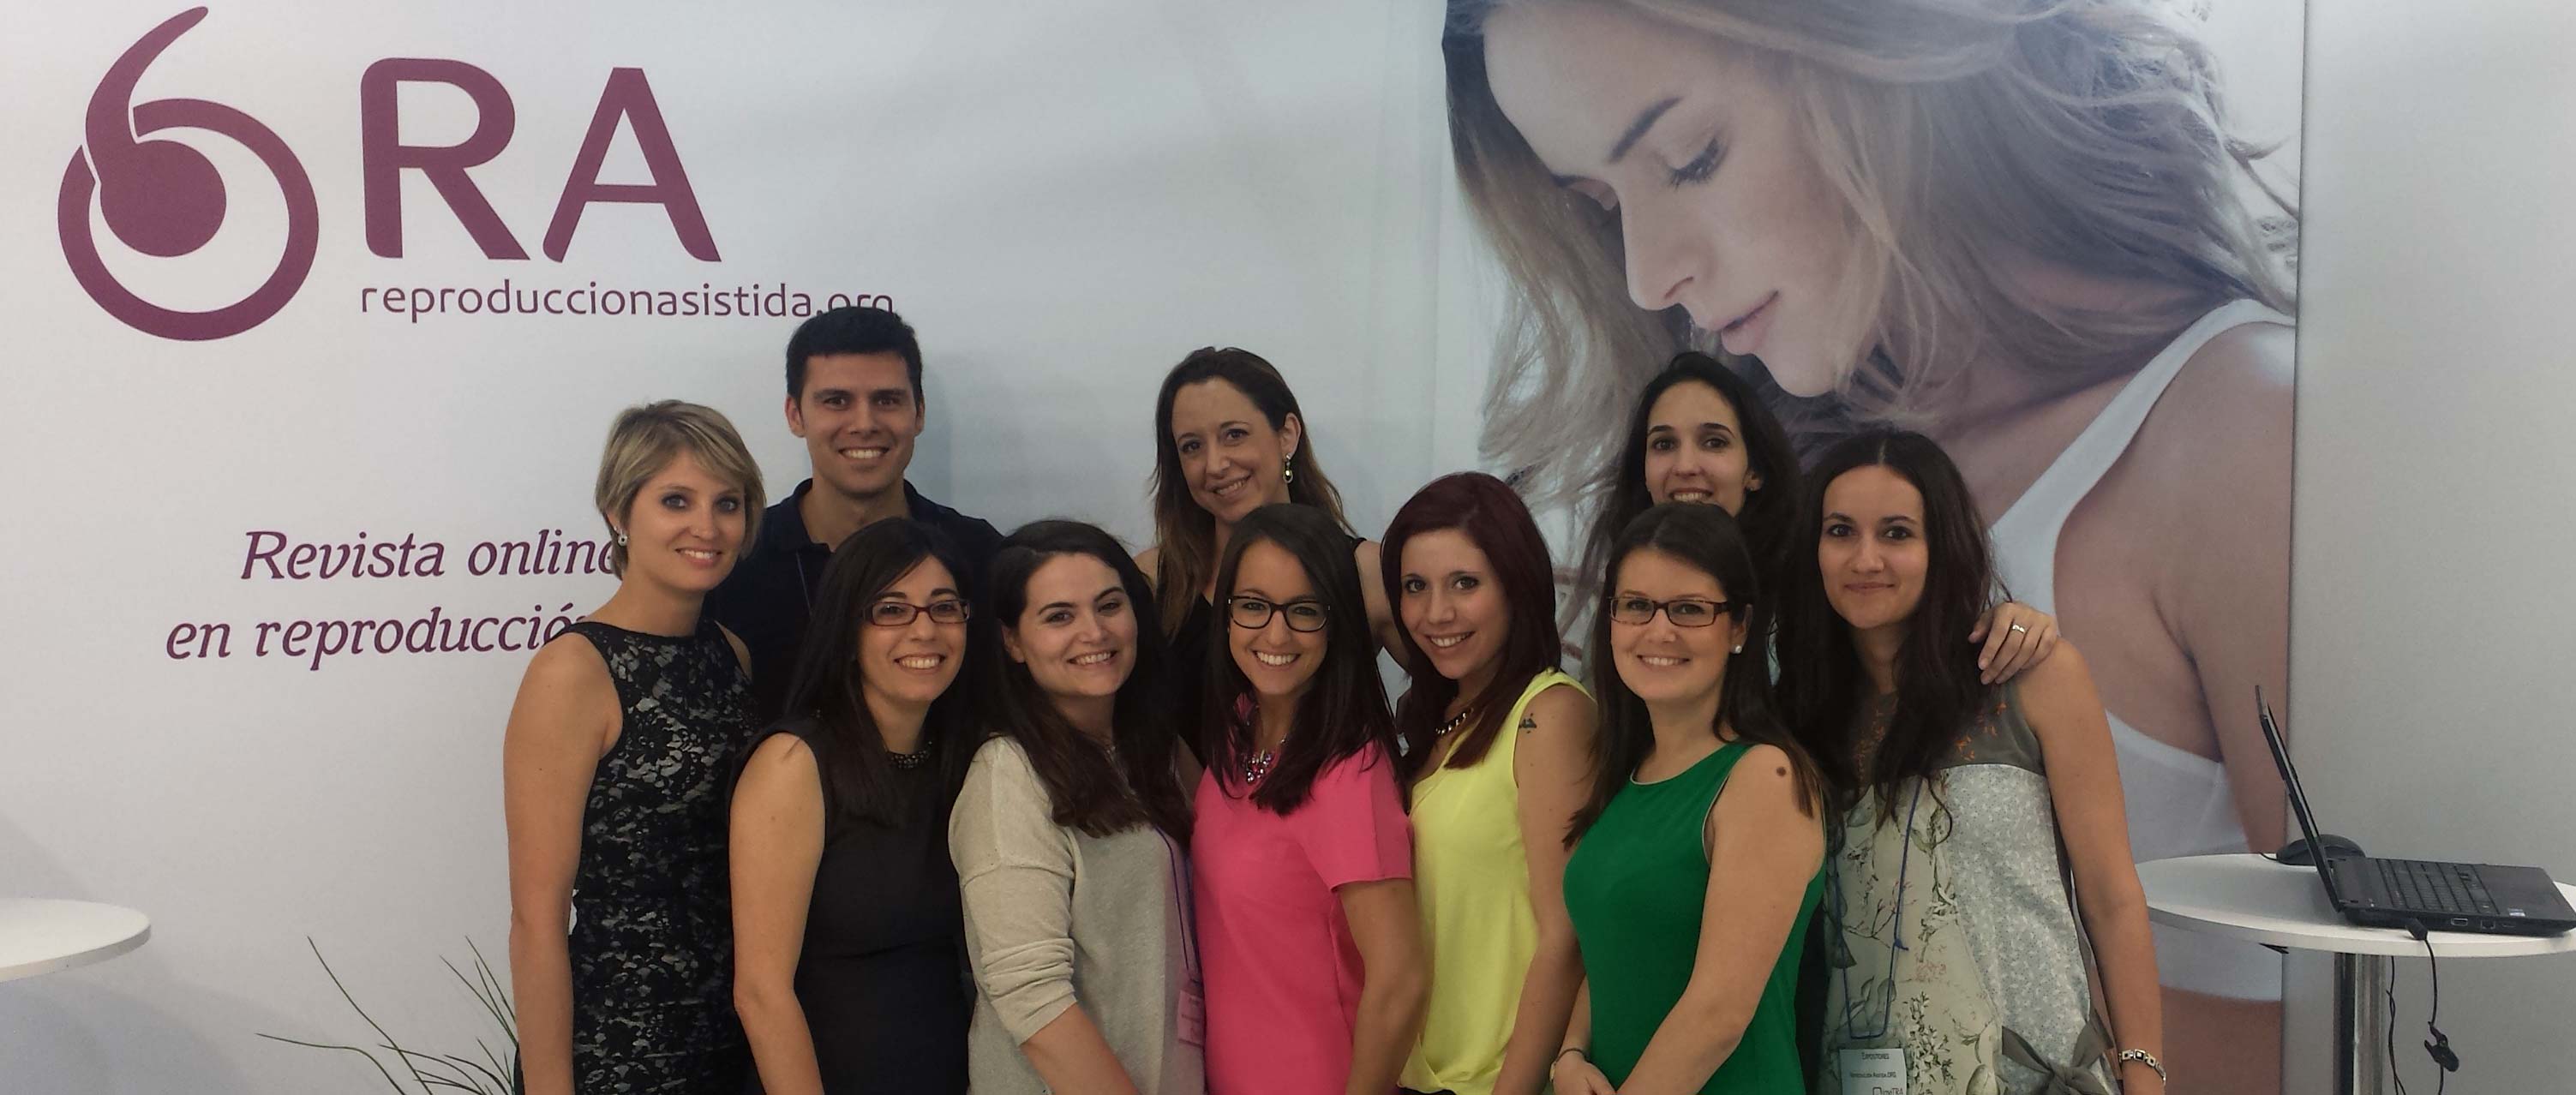 Stand in inviTRA 2015 of ORG Assisted Reproduction, the organizers of the event